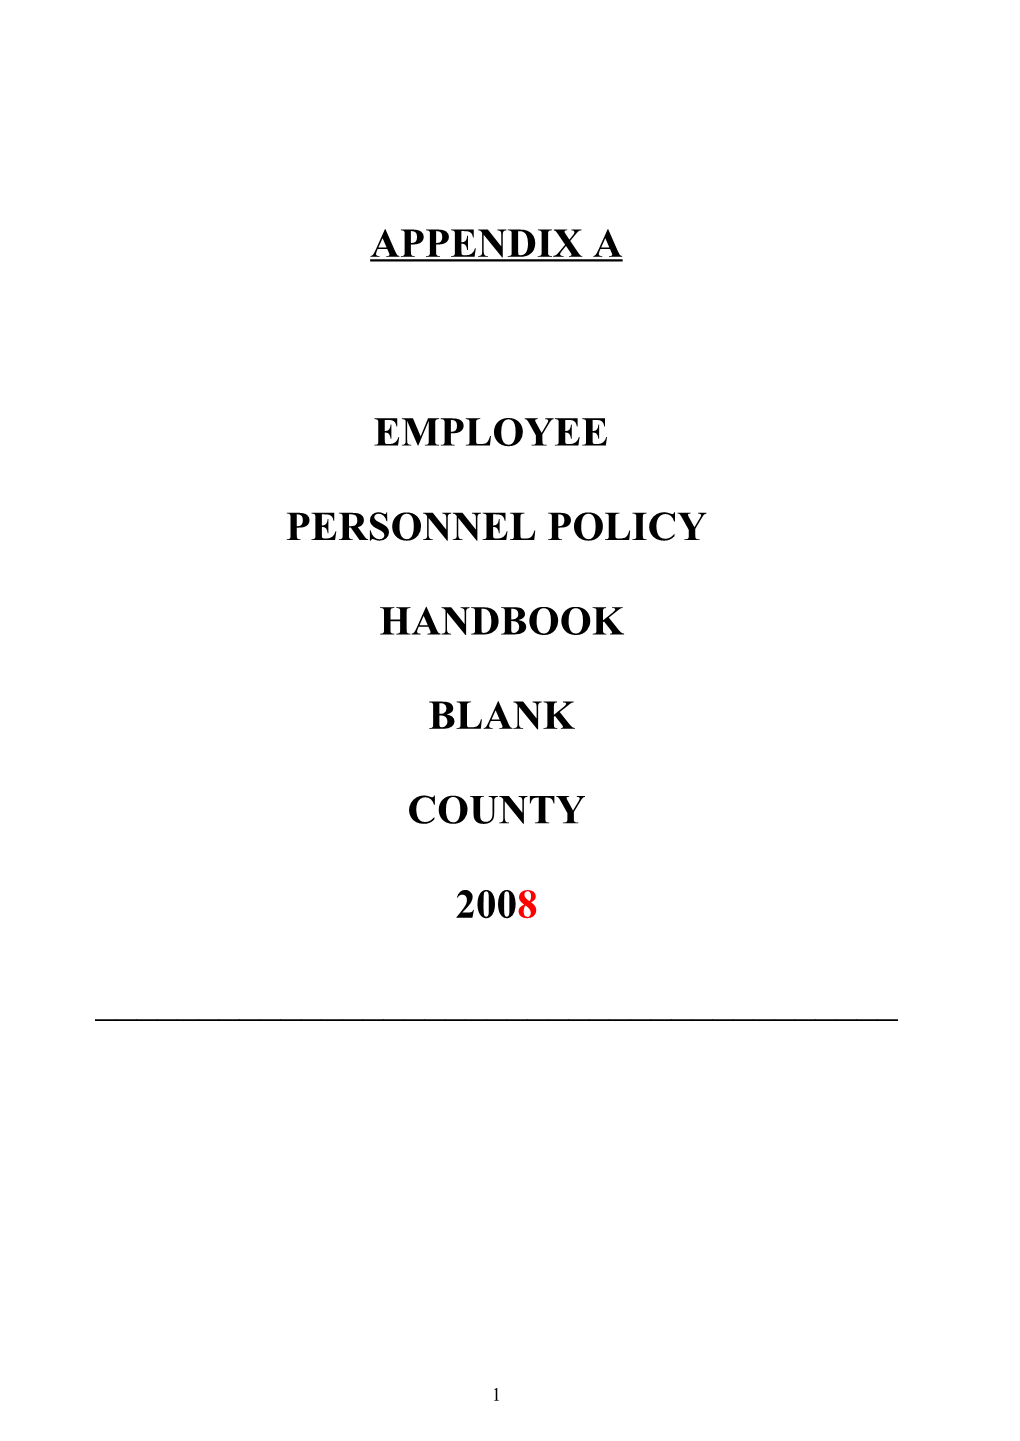 Place Signed Copy in Employee S Personnel File